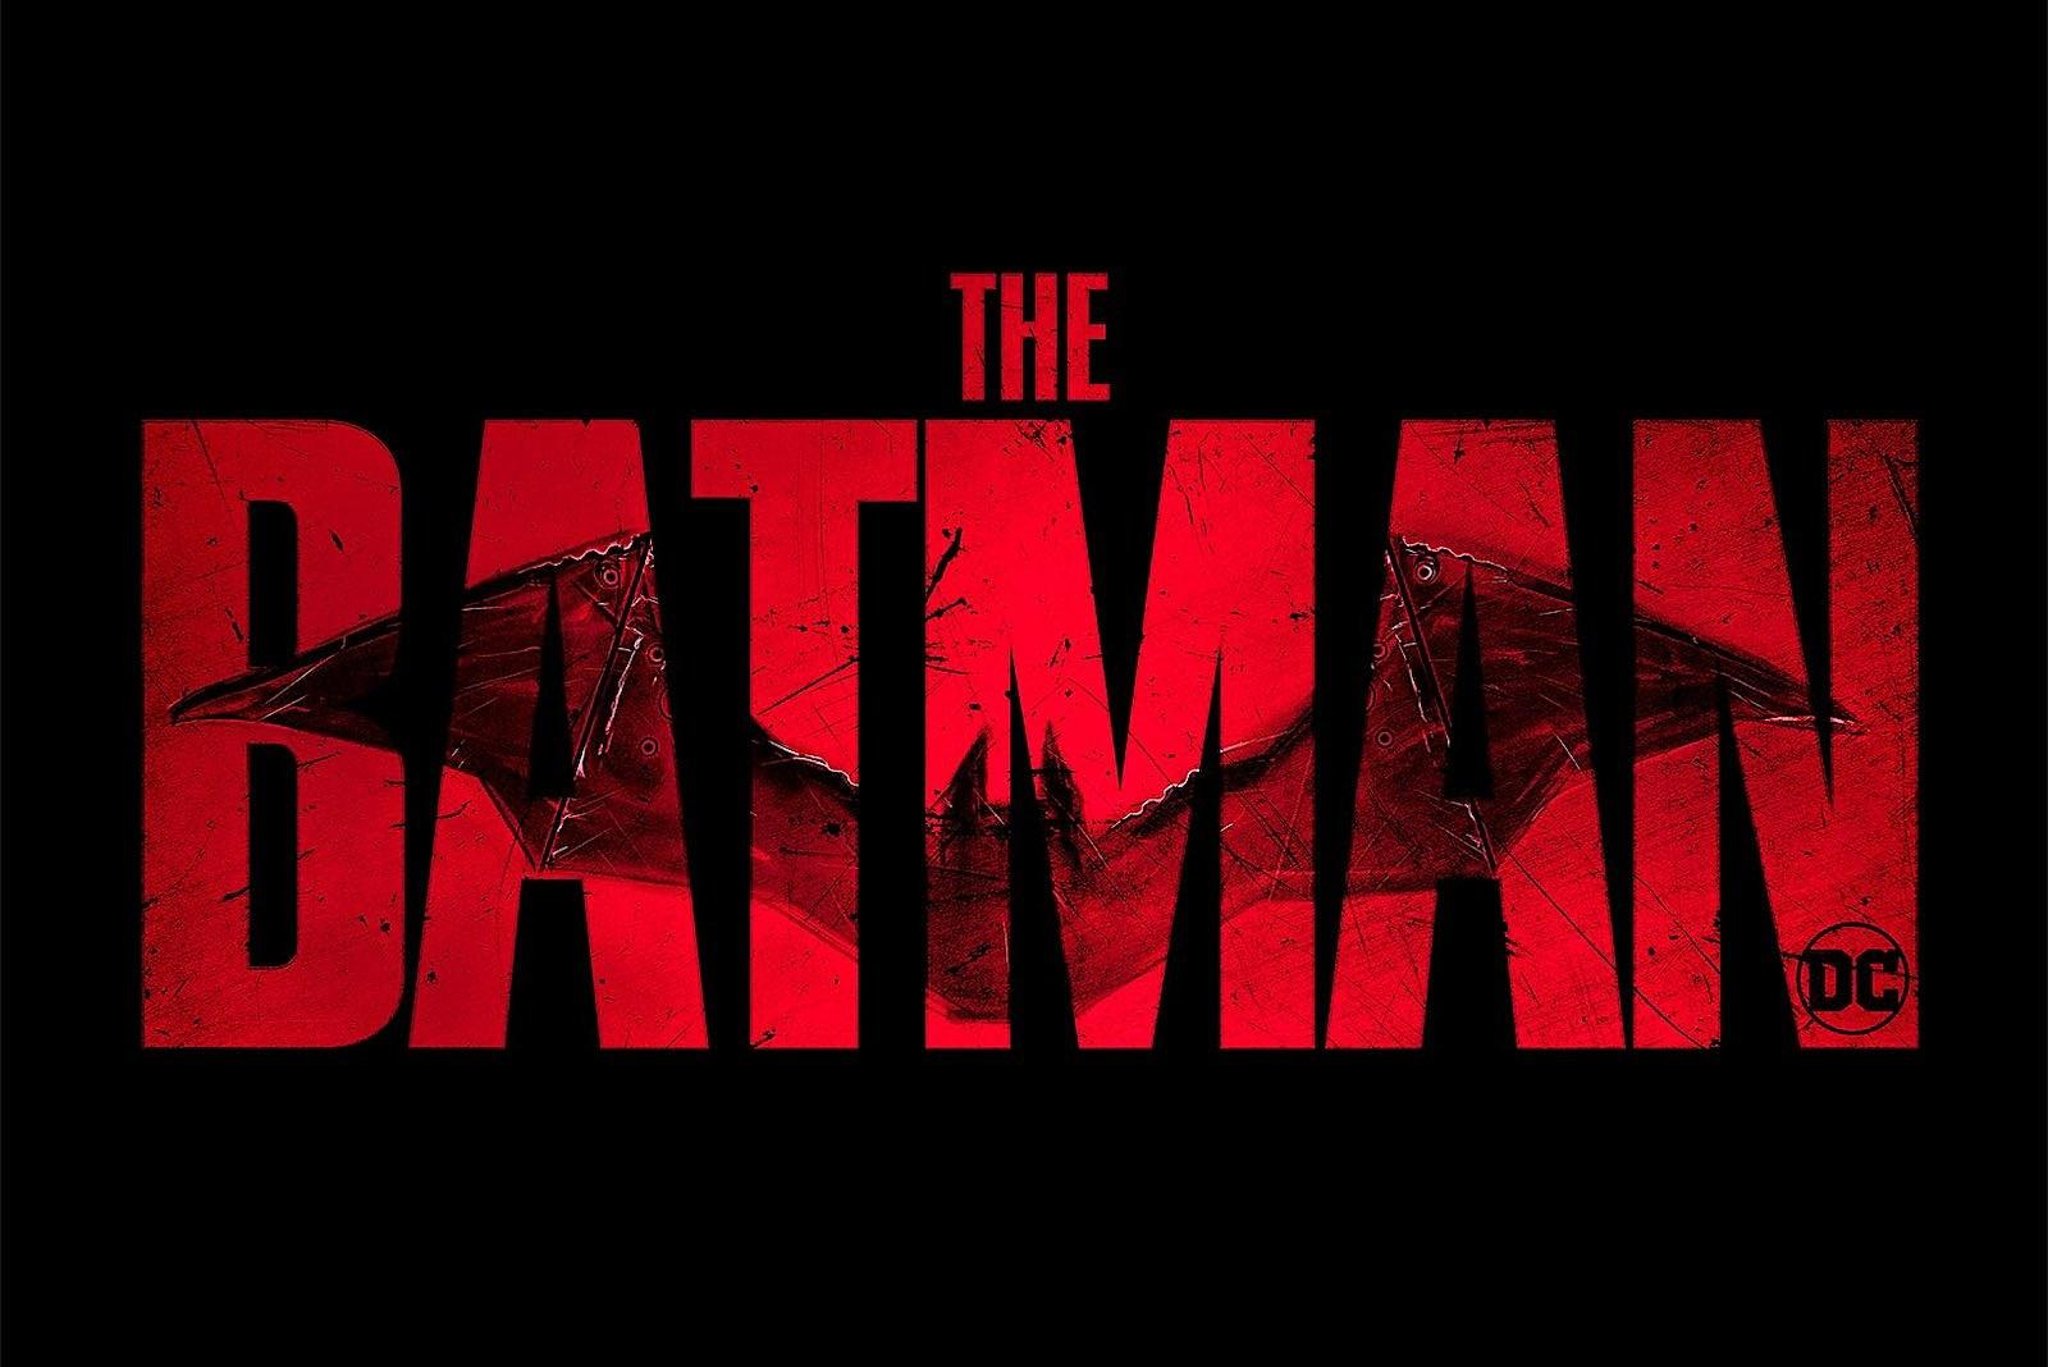 The Batman: Release date, cast, age rating, trailer and the areas of Scotland where The Batman was filmed | The Scotsman